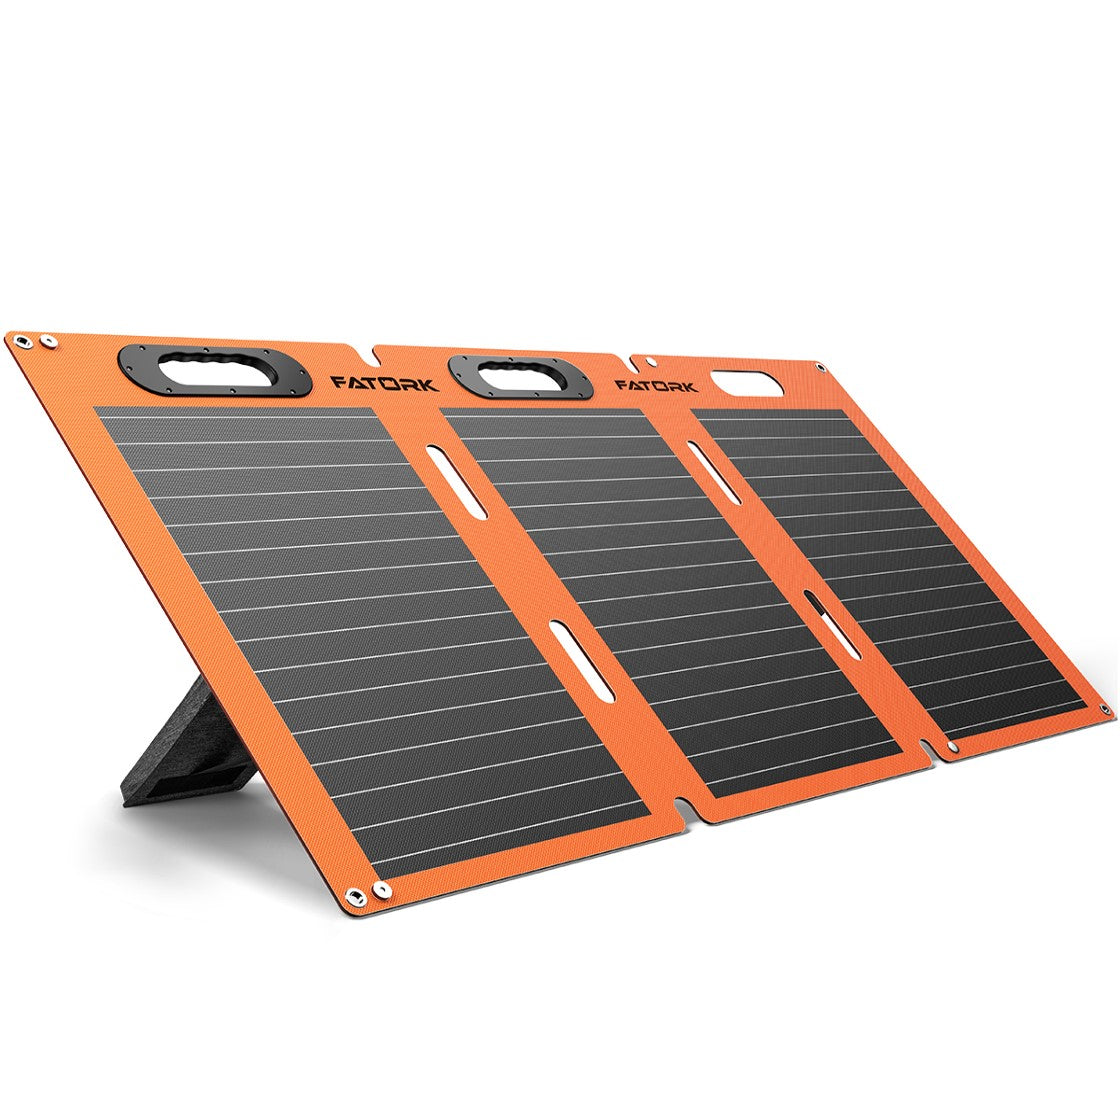 Introducing the 100W Portable Solar Panel by FATORK